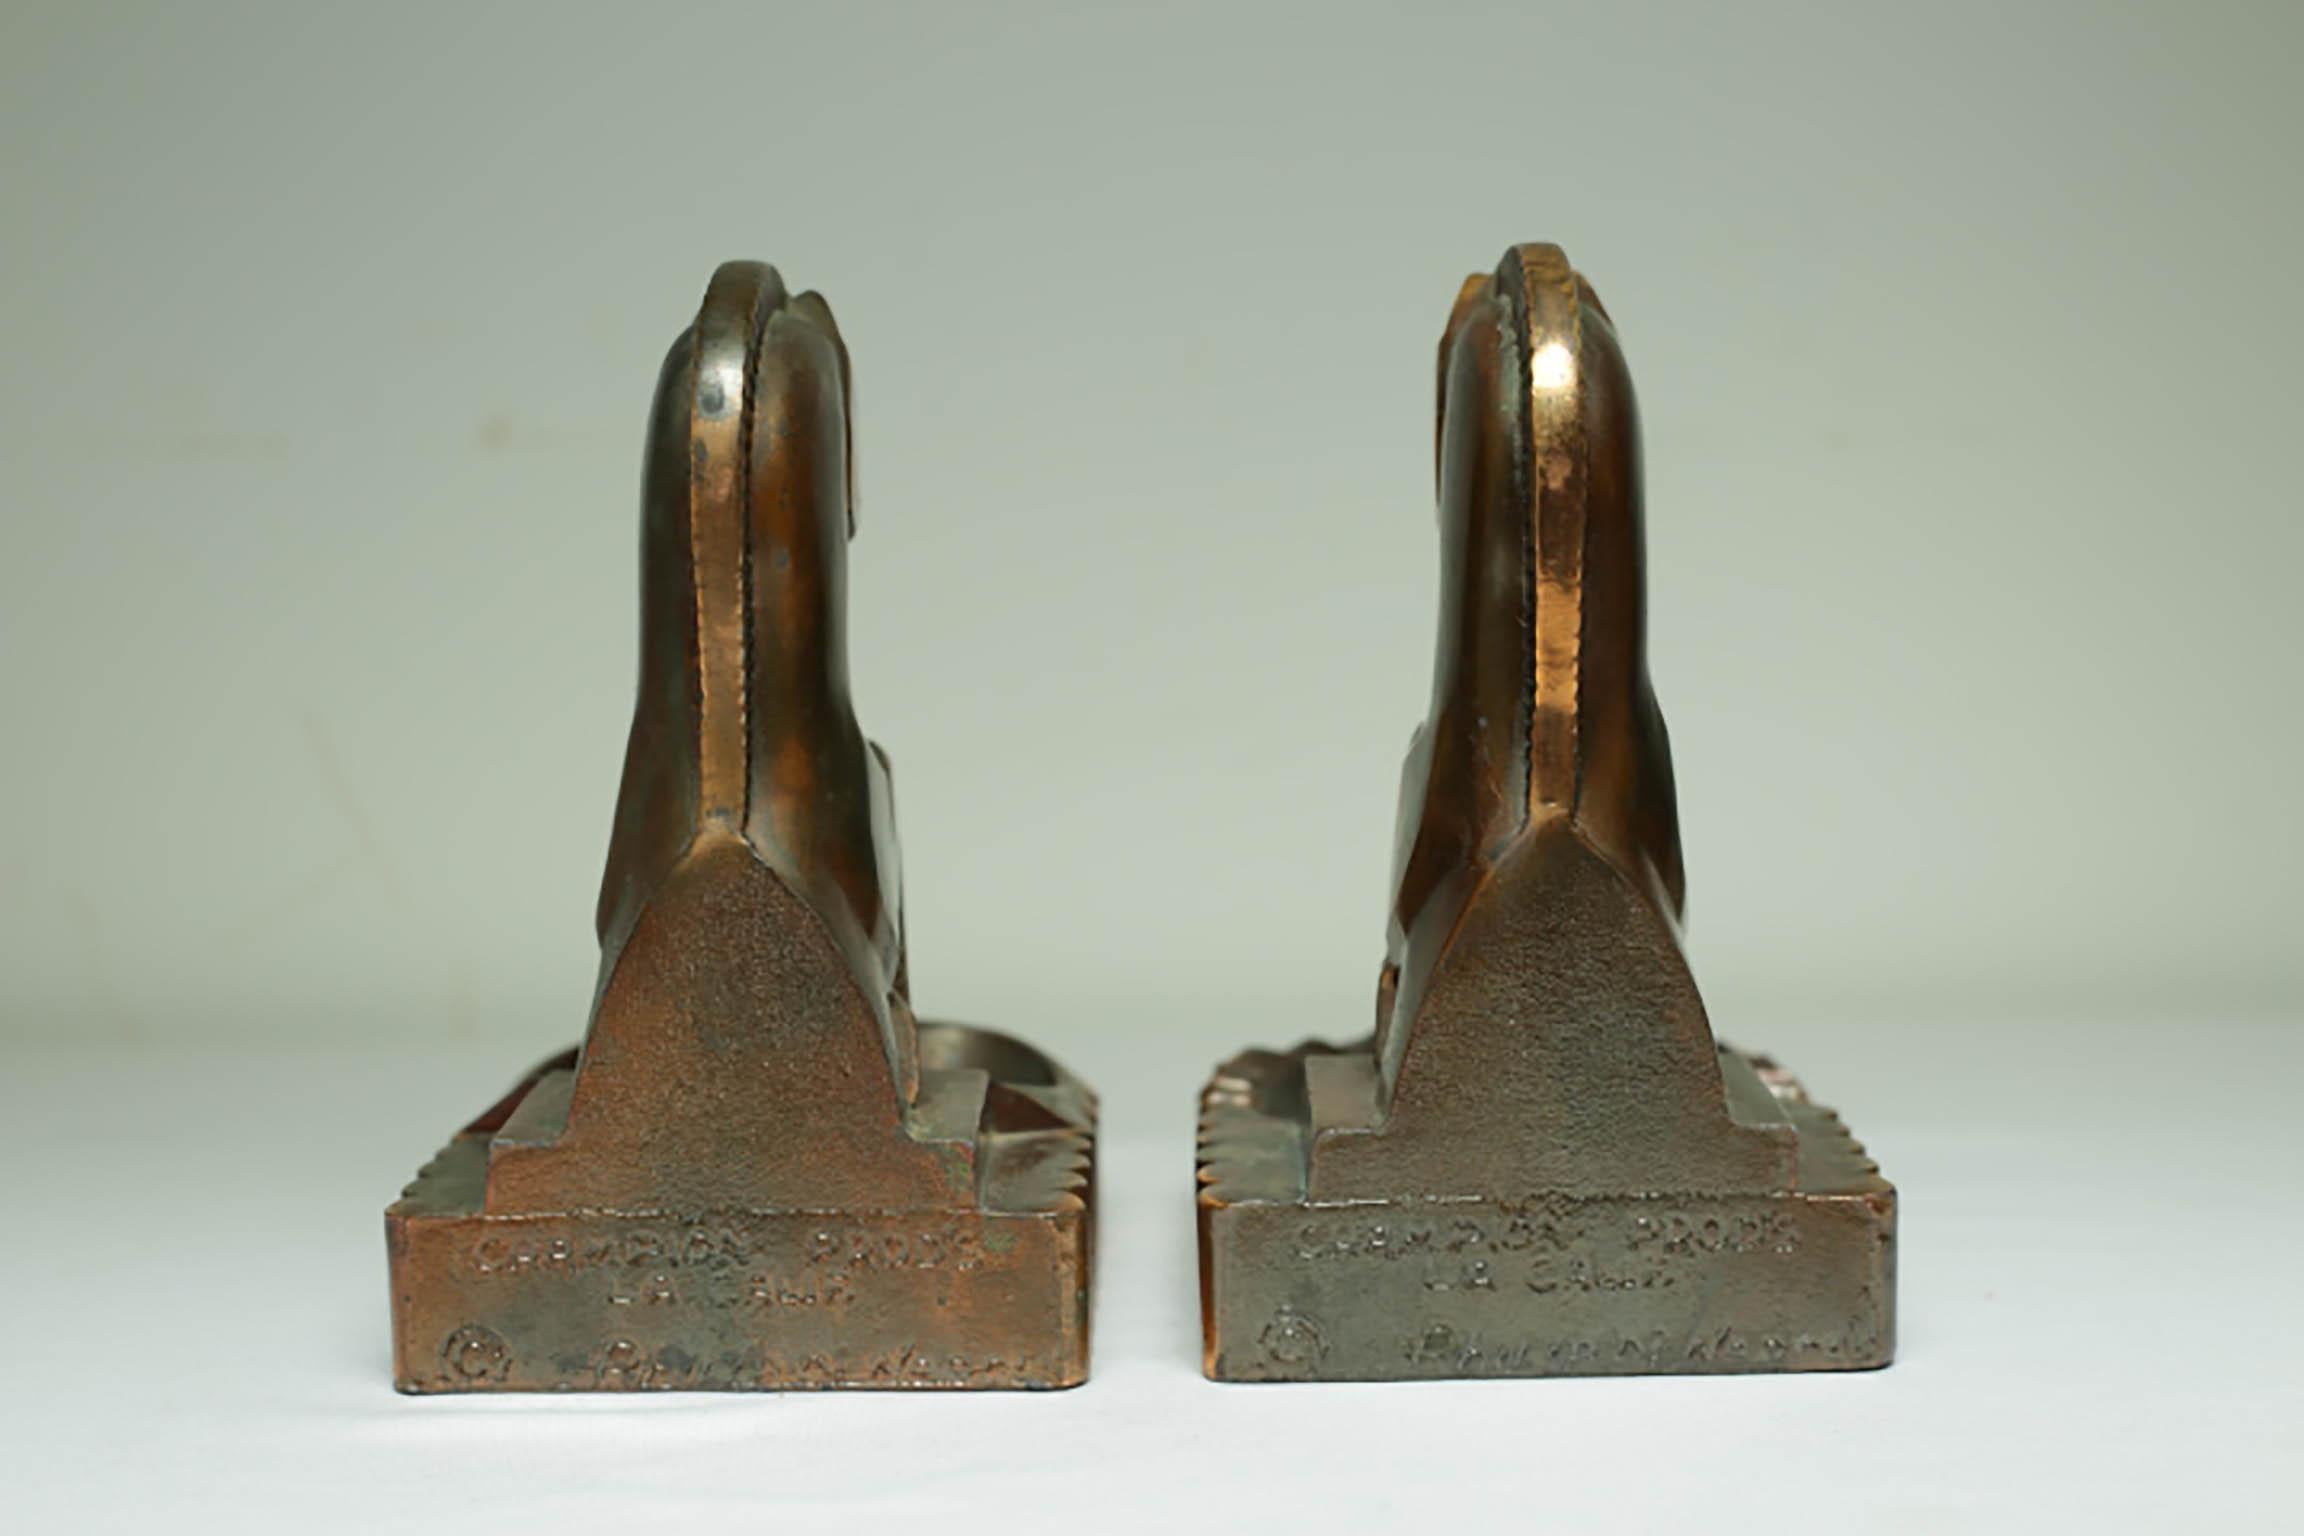 ABOUT

This is an original pair of Art Deco style cast gray or 